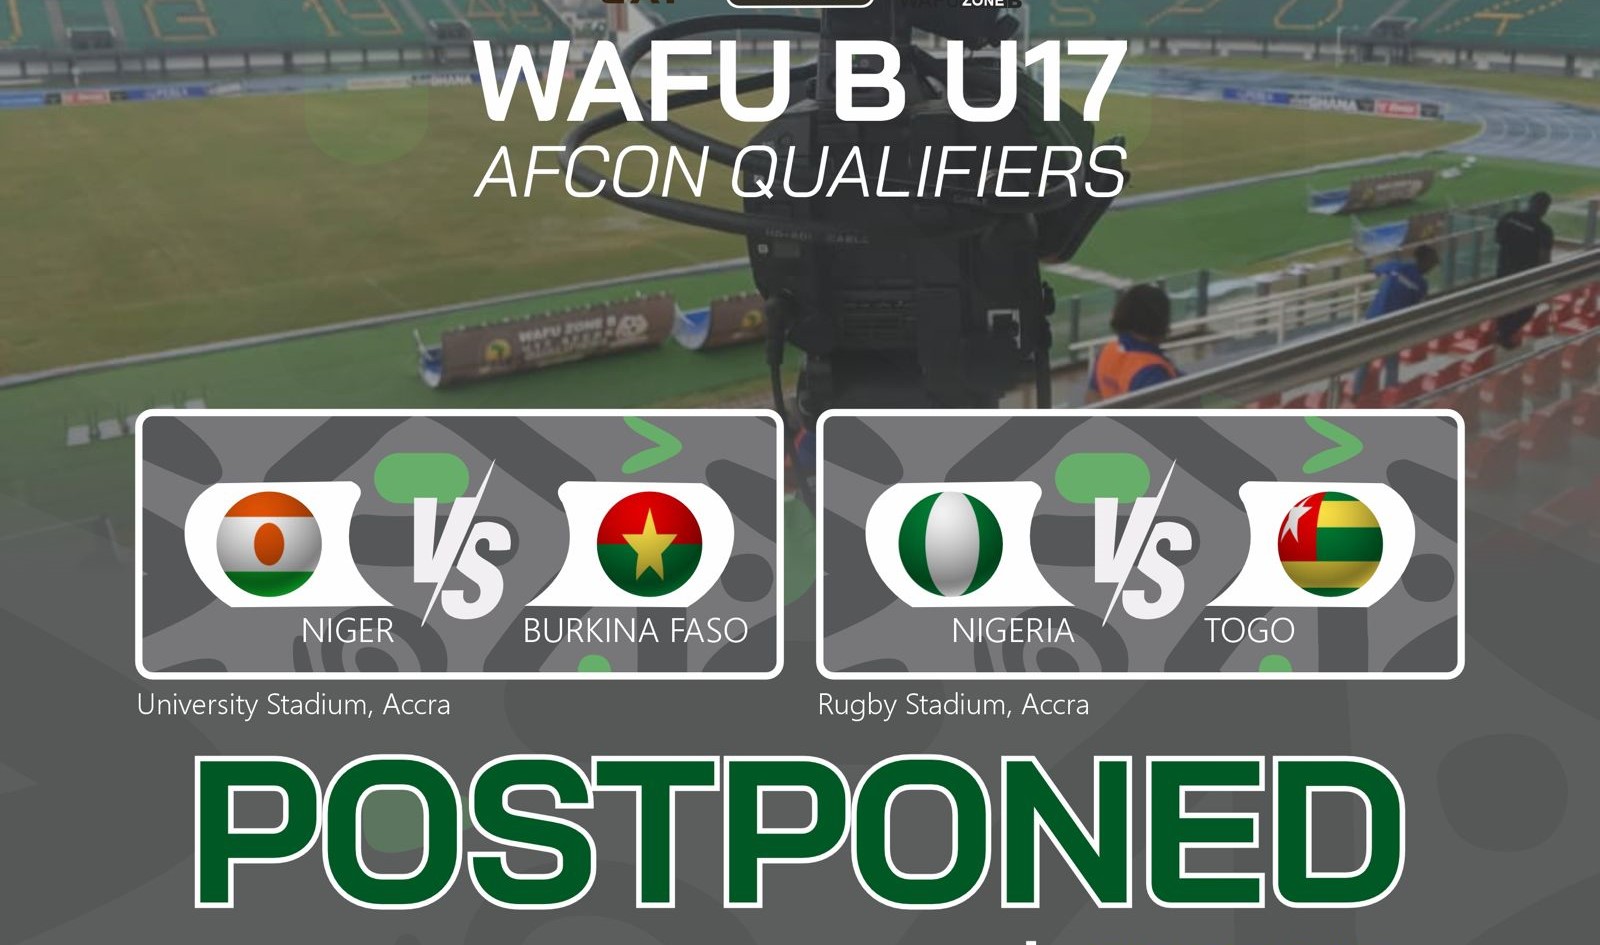 WAFU B U17 Championship: All Group B matches postponed due to heavy downpour in Accra